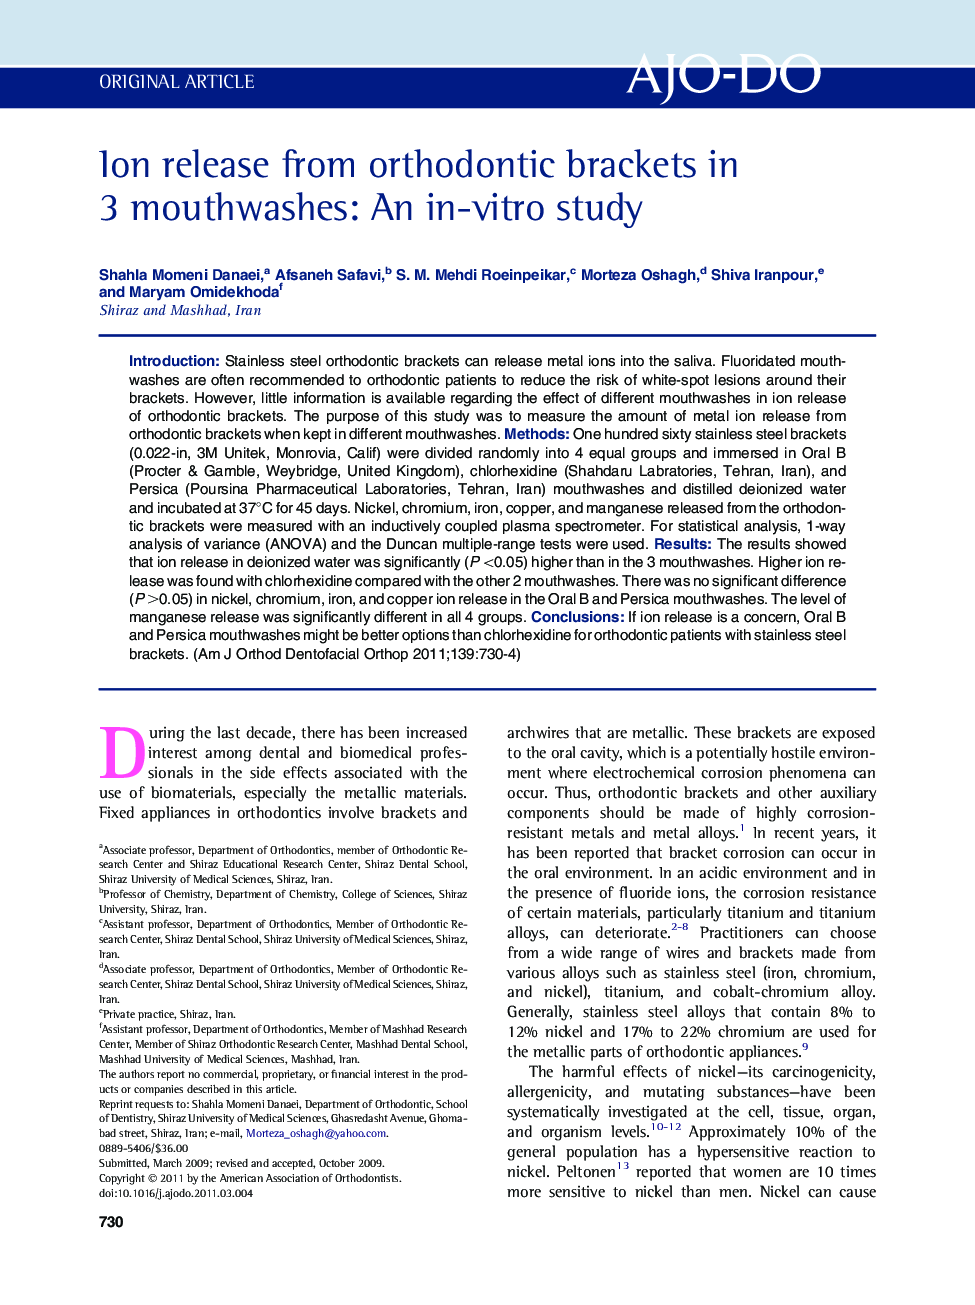 Ion release from orthodontic brackets in 3 mouthwashes: An in-vitro study 